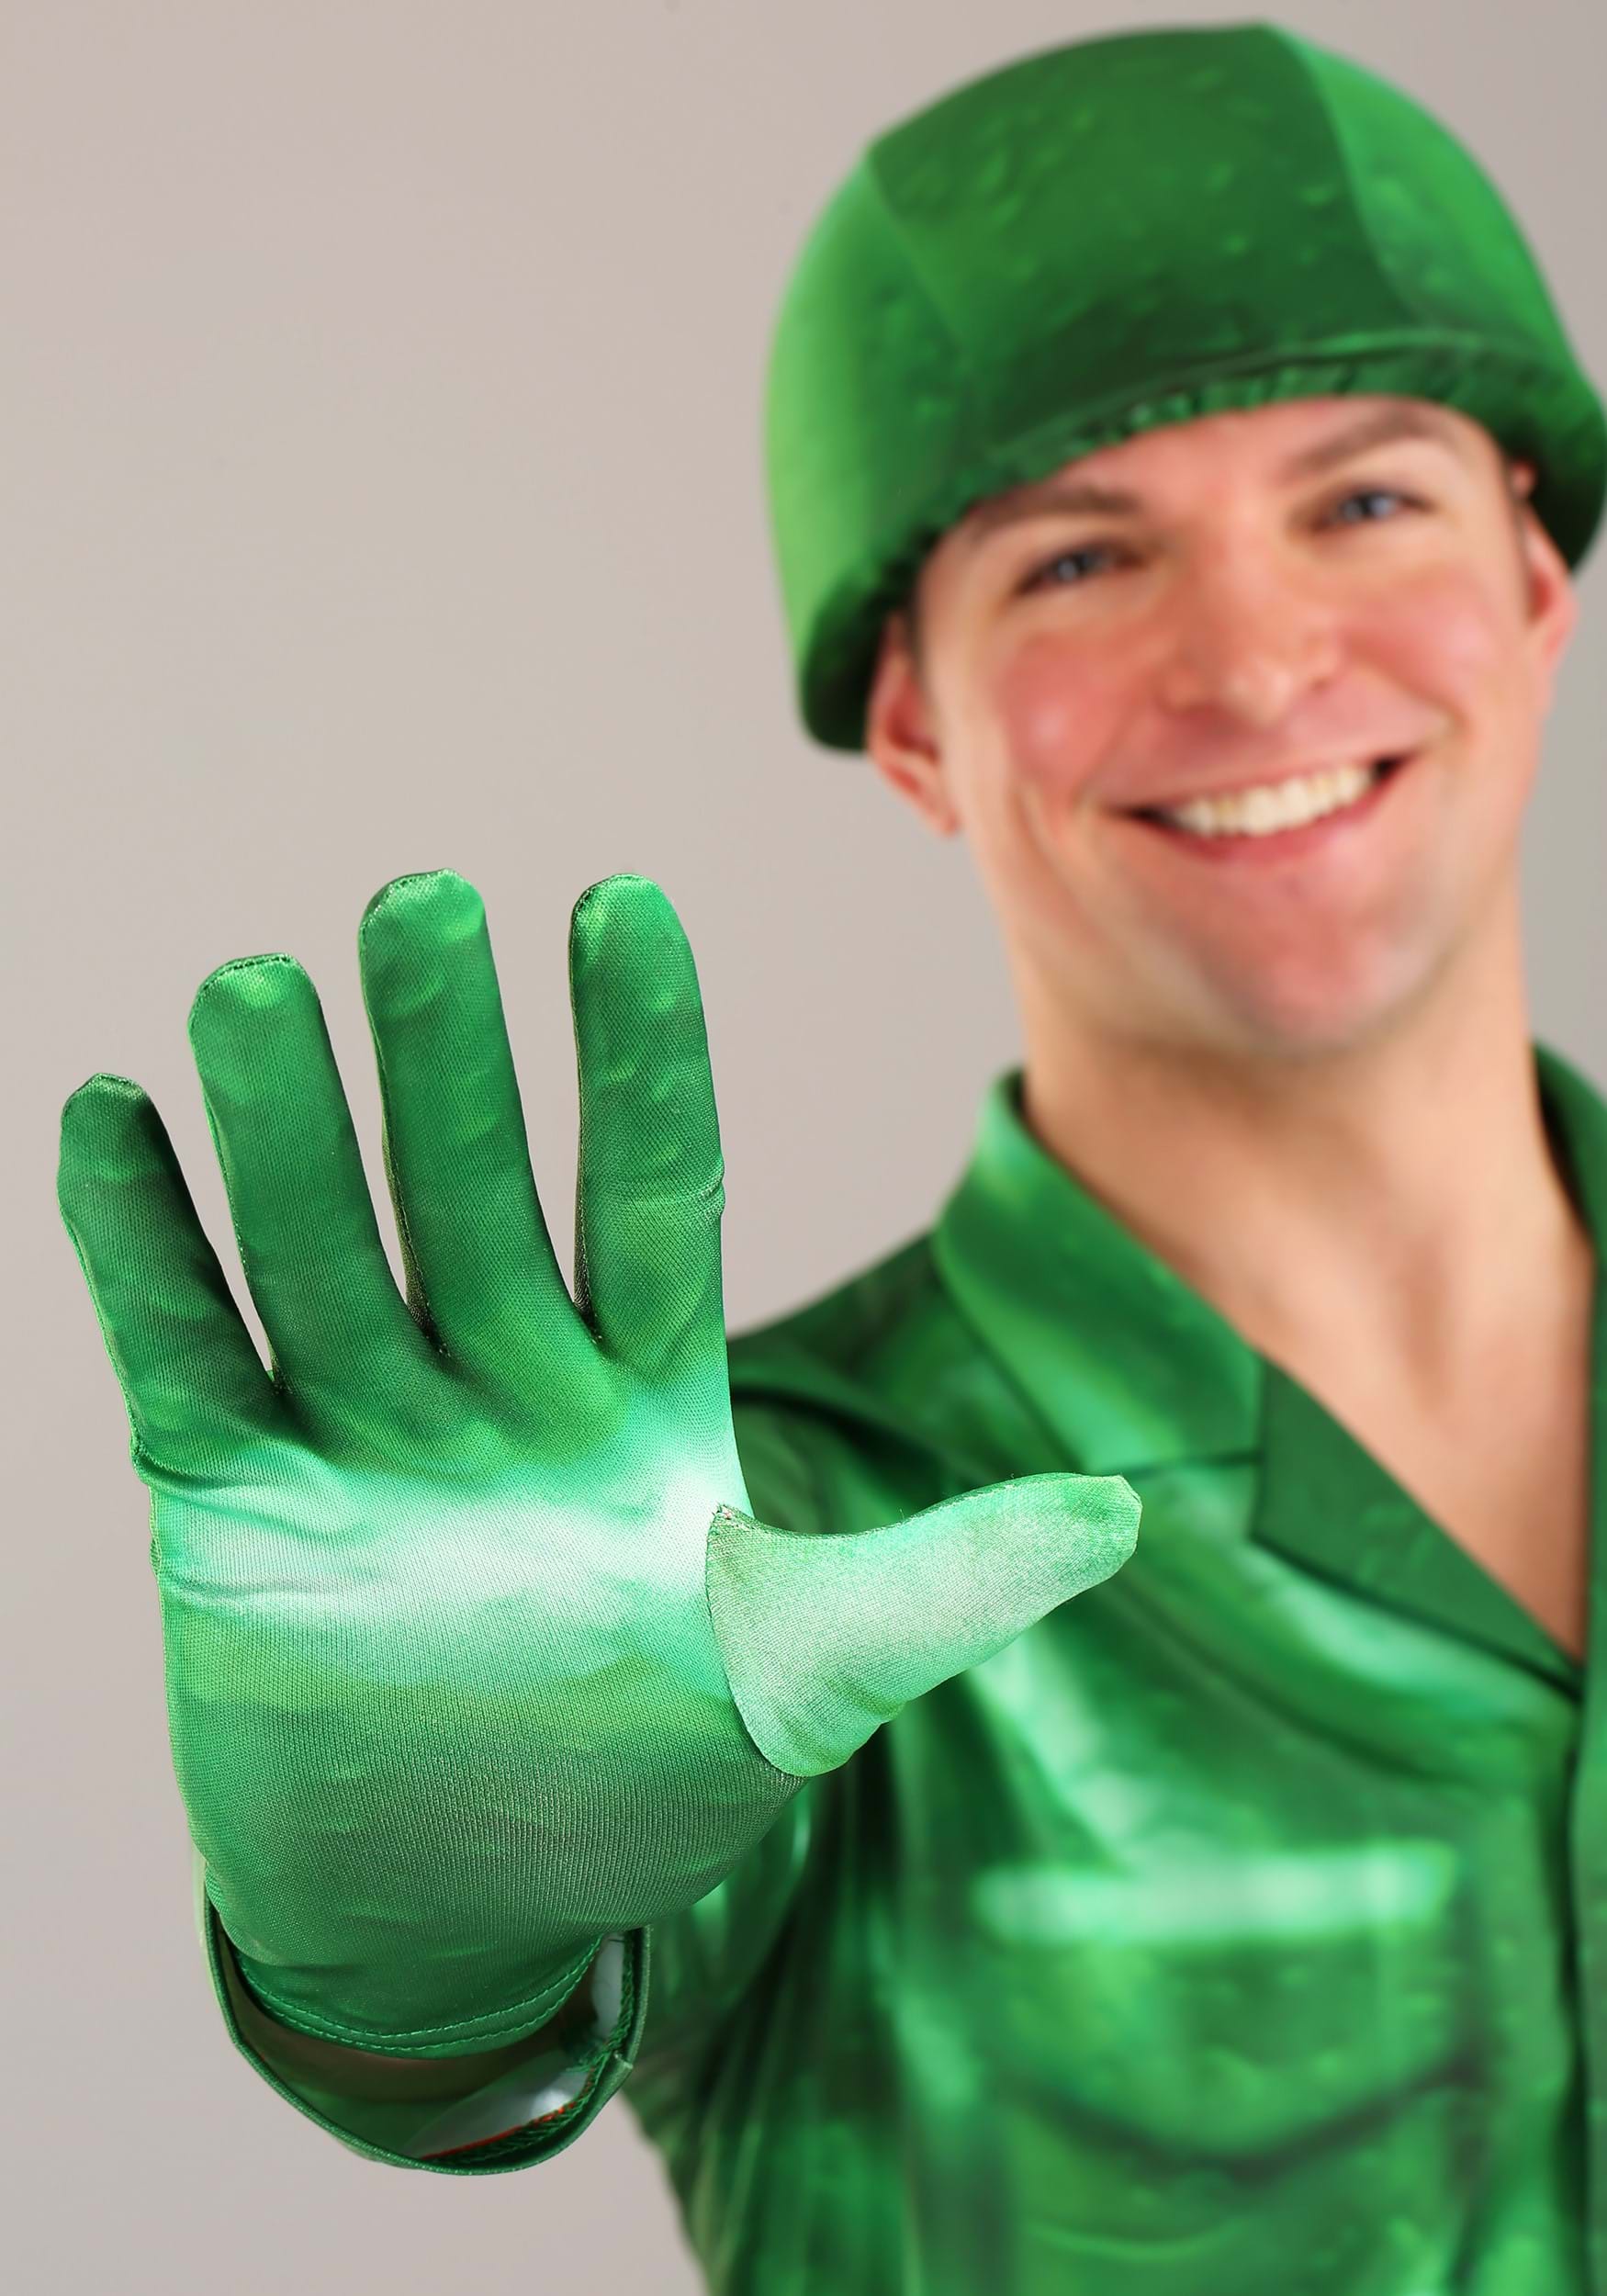 Plastic Army Man Costume - Army Military